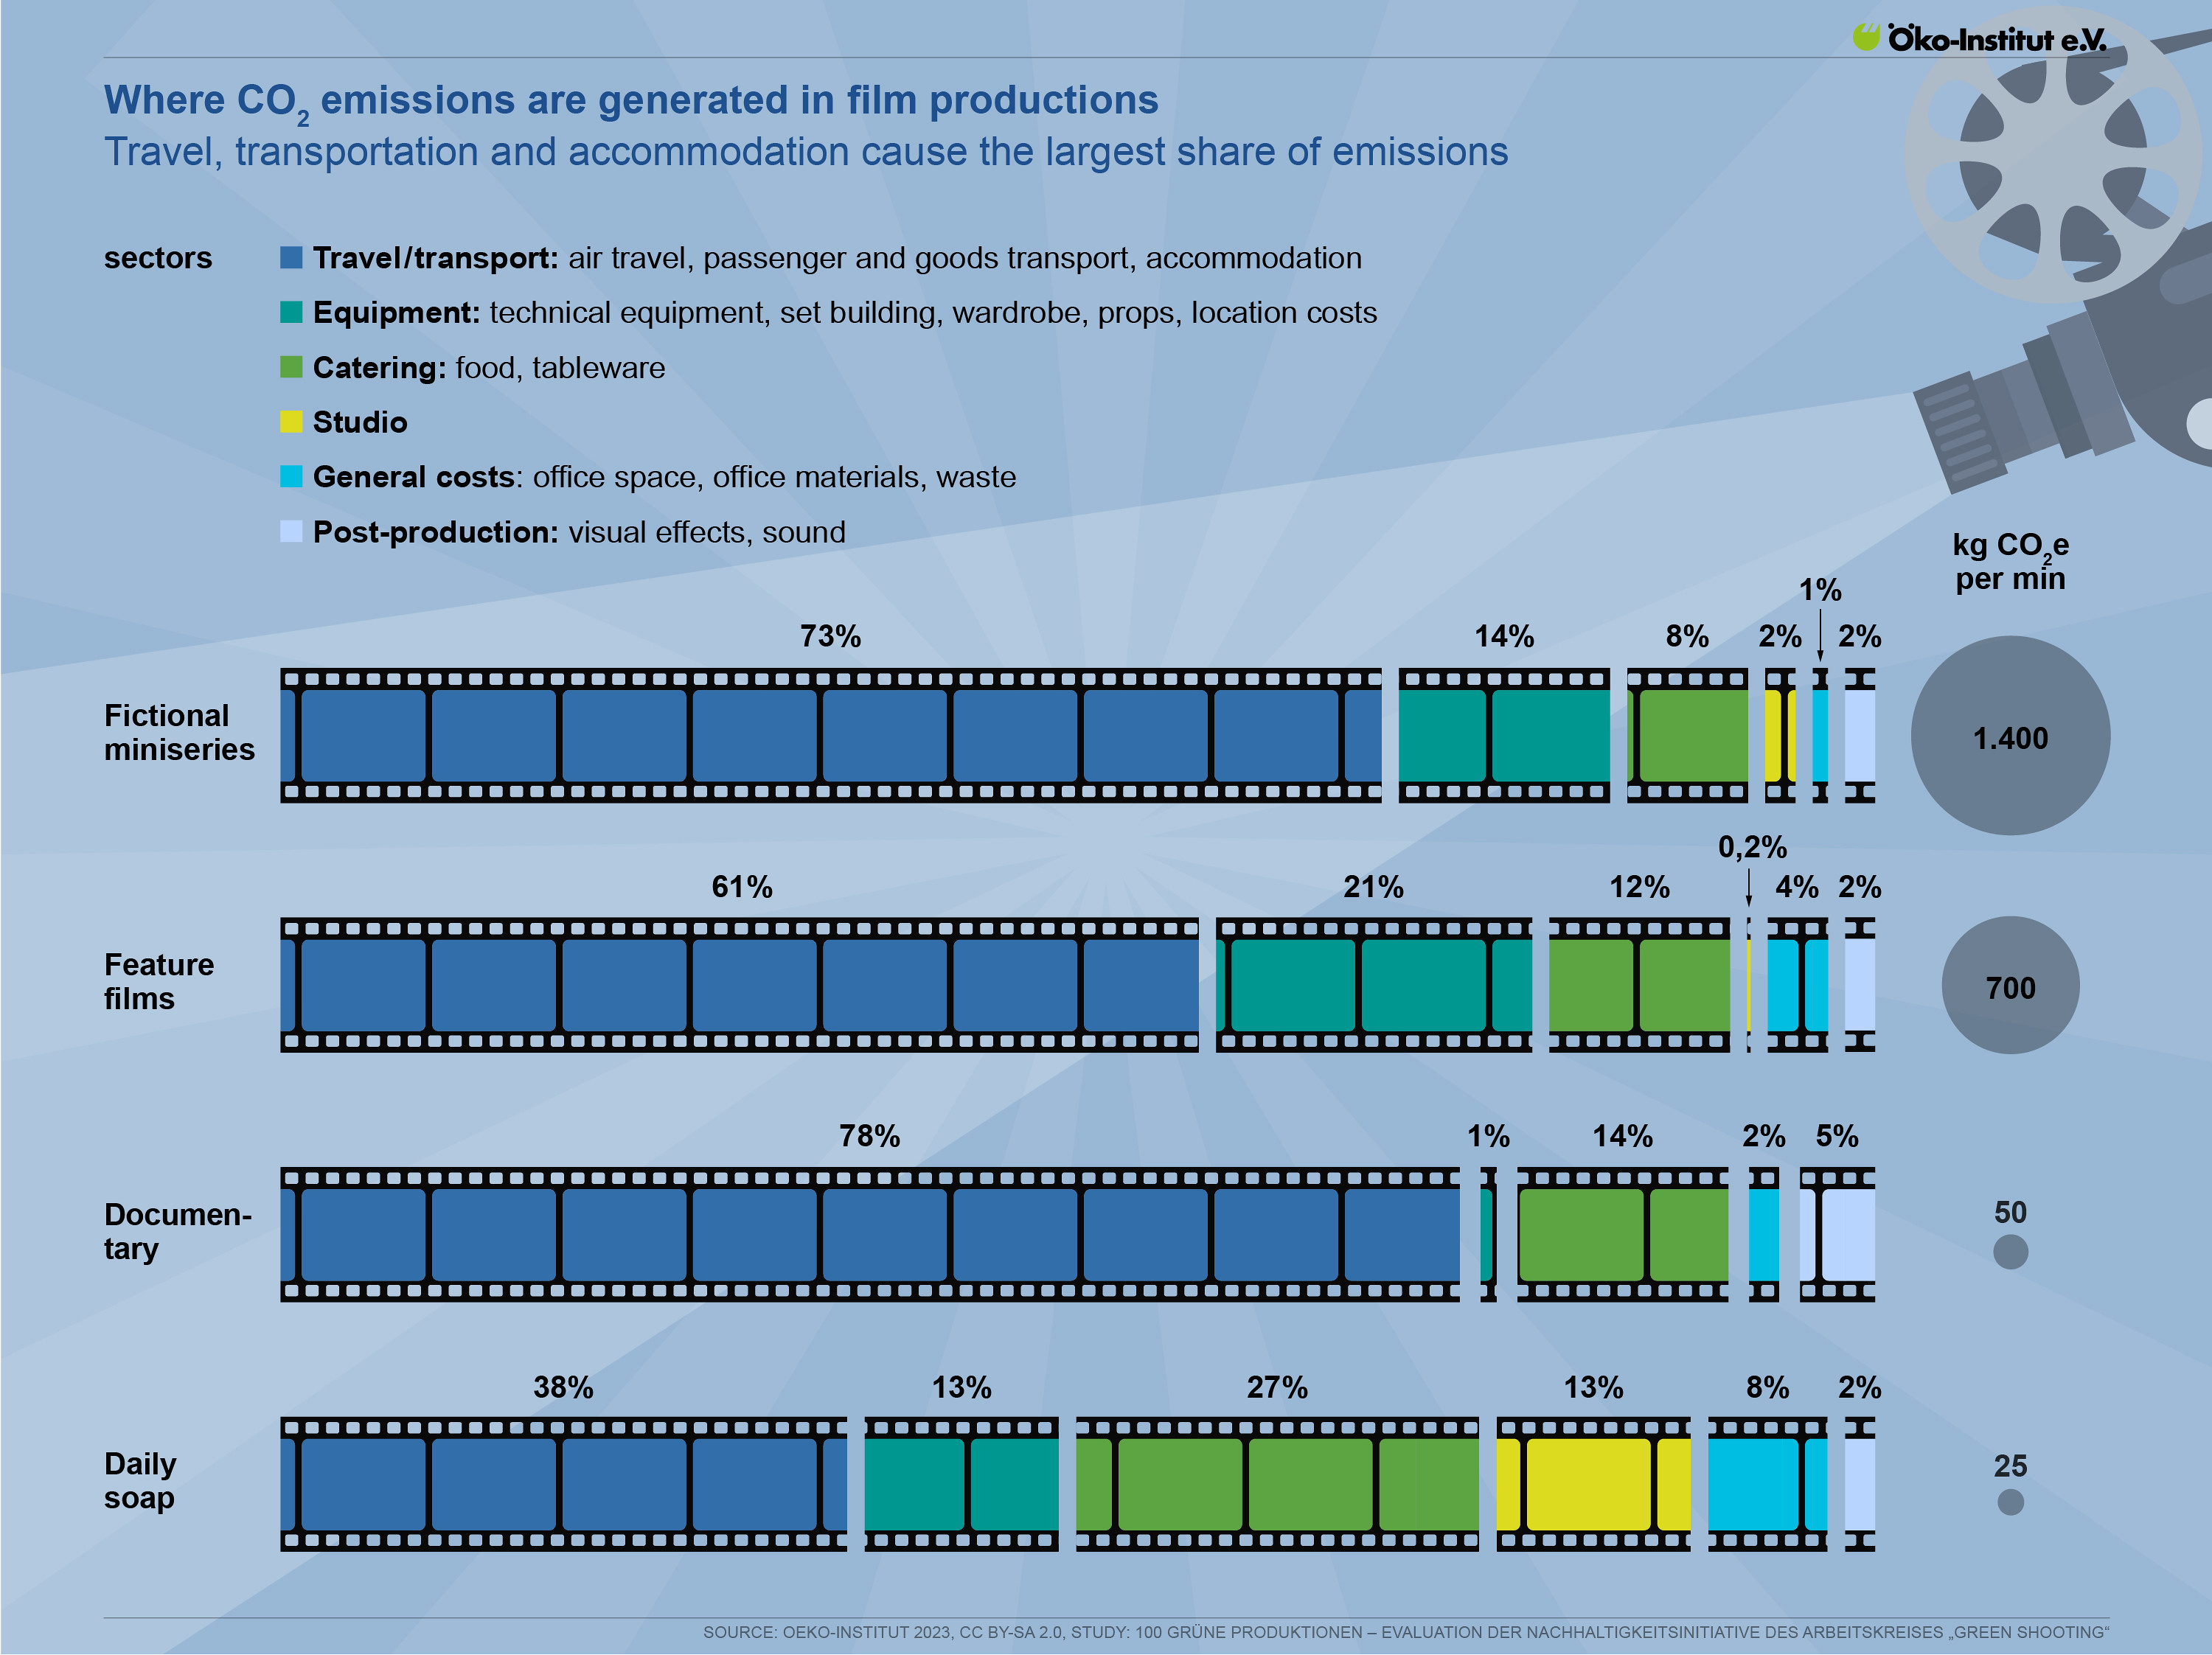 Where CO2 emissions are generated in film production